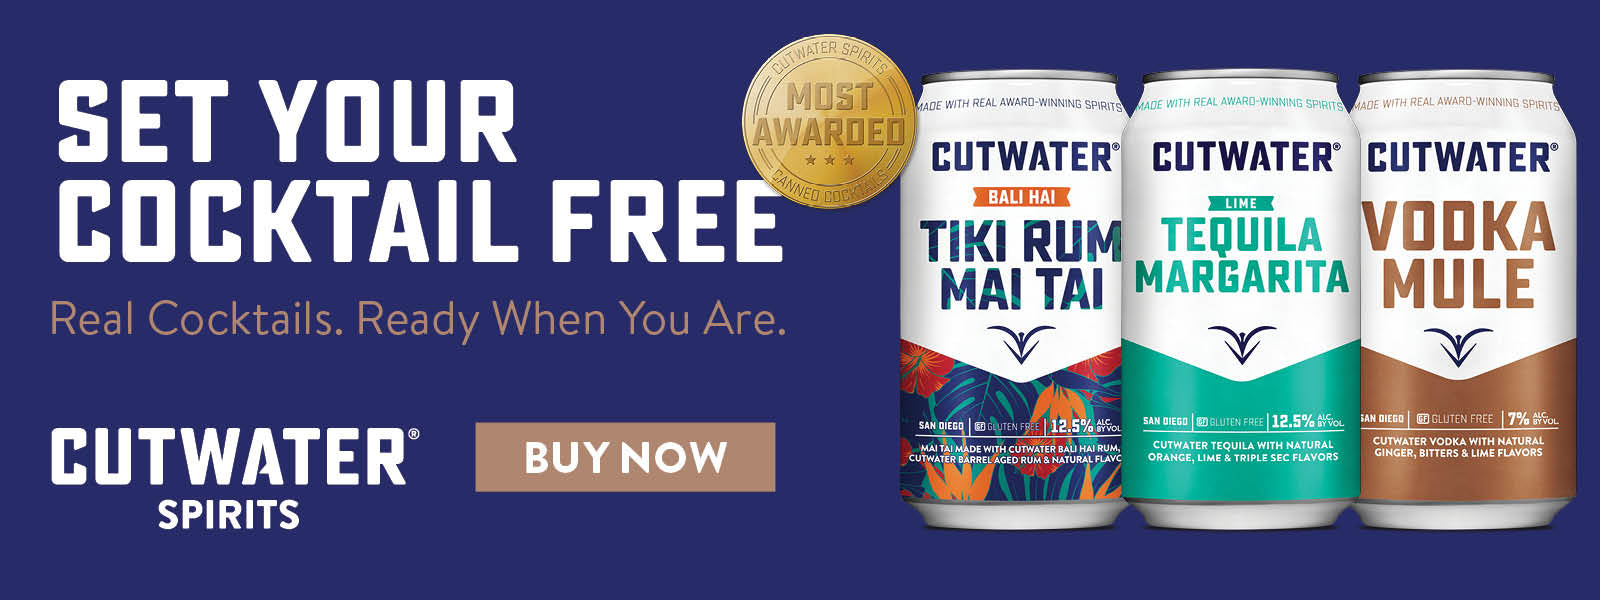 Buy Cutwater Spirits, Cocktails Cans, Whiskey, Tequila, Vodka and Gin Online at CaskCartel.com